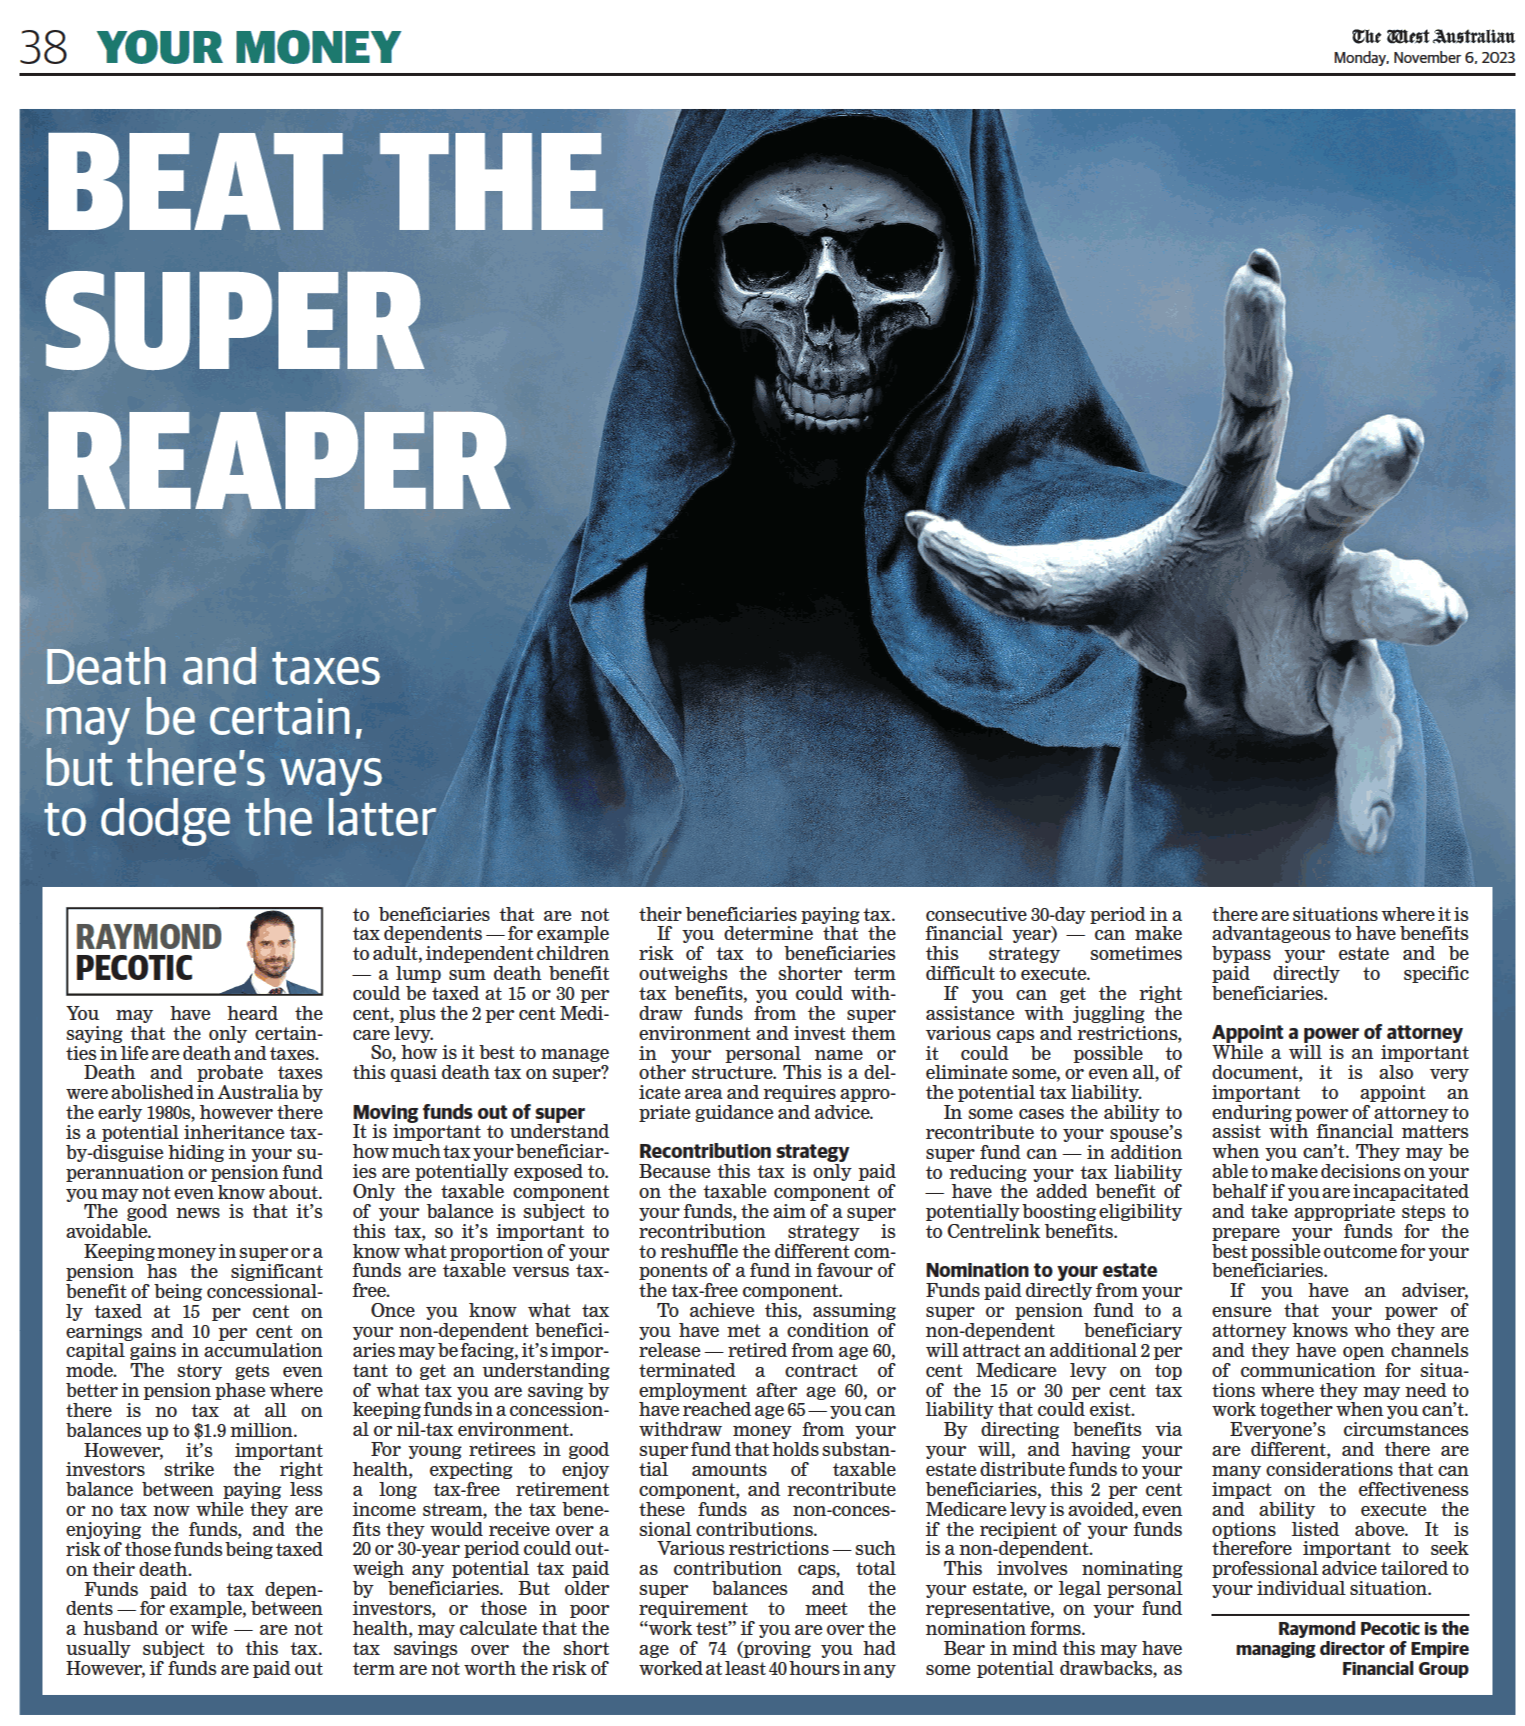 Beat the Super Reaper Article in The West